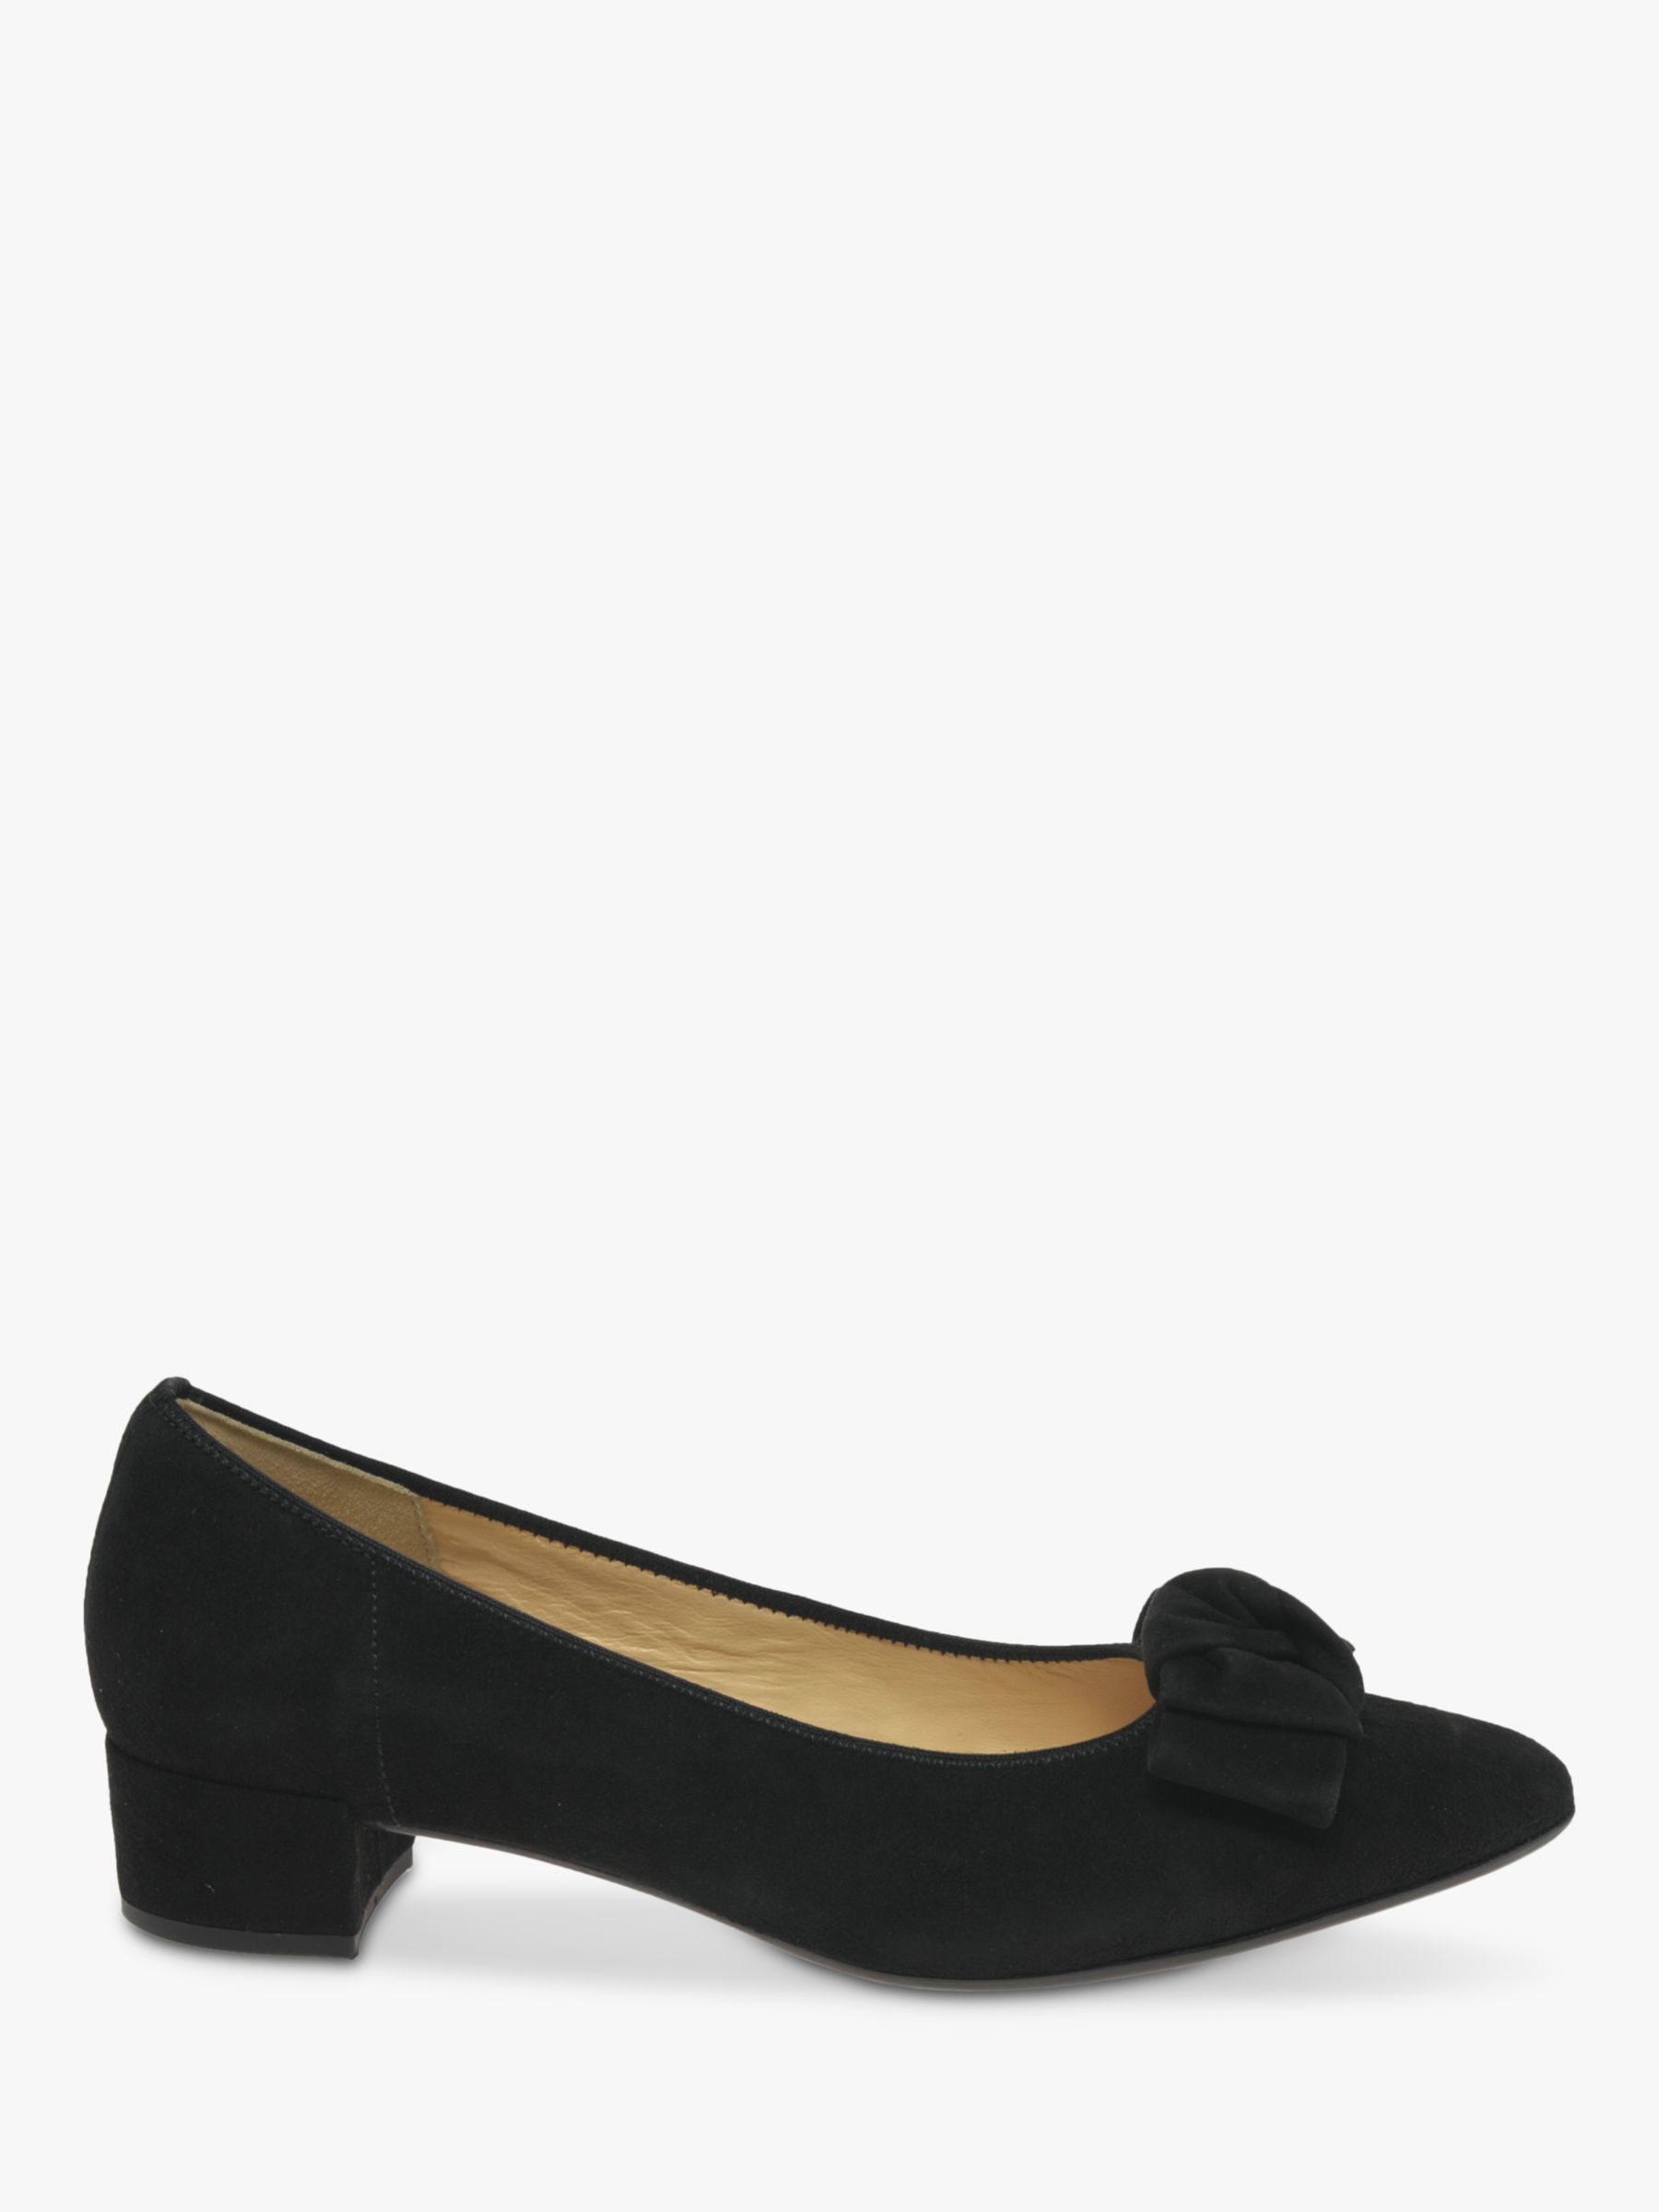 gabor navy blue court shoes